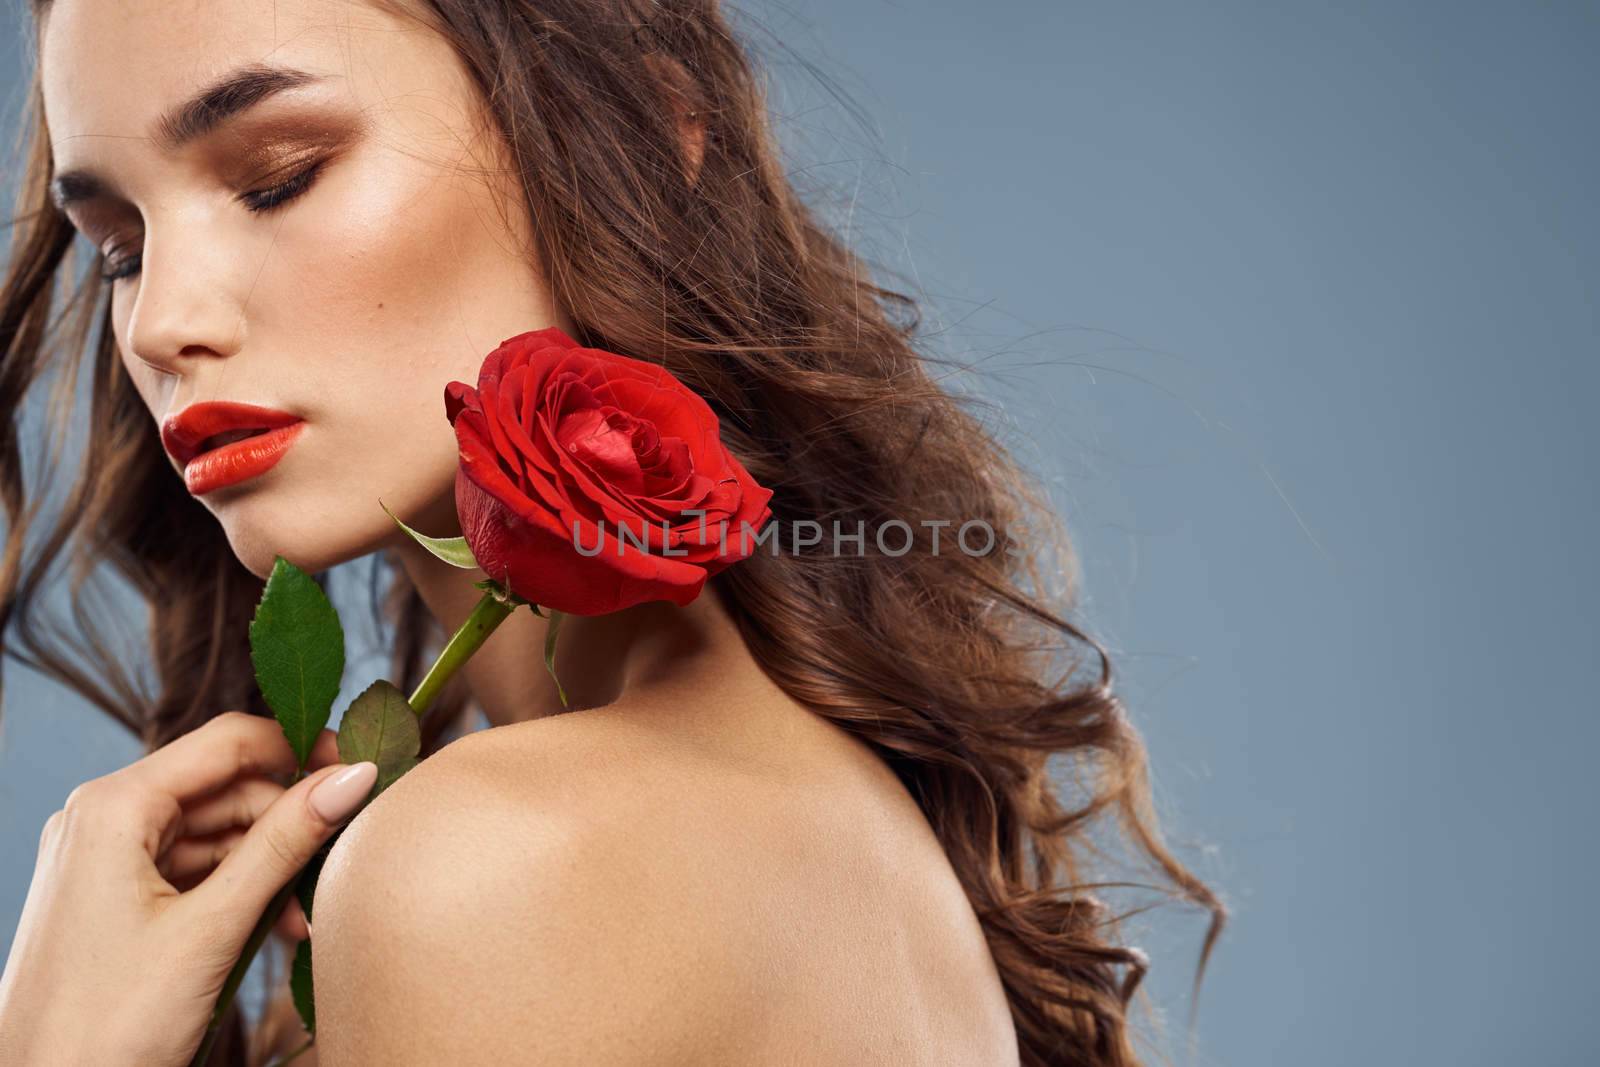 Portrait of a woman with a red rose in her hands on a gray background naked shoulders evening makeup. High quality photo